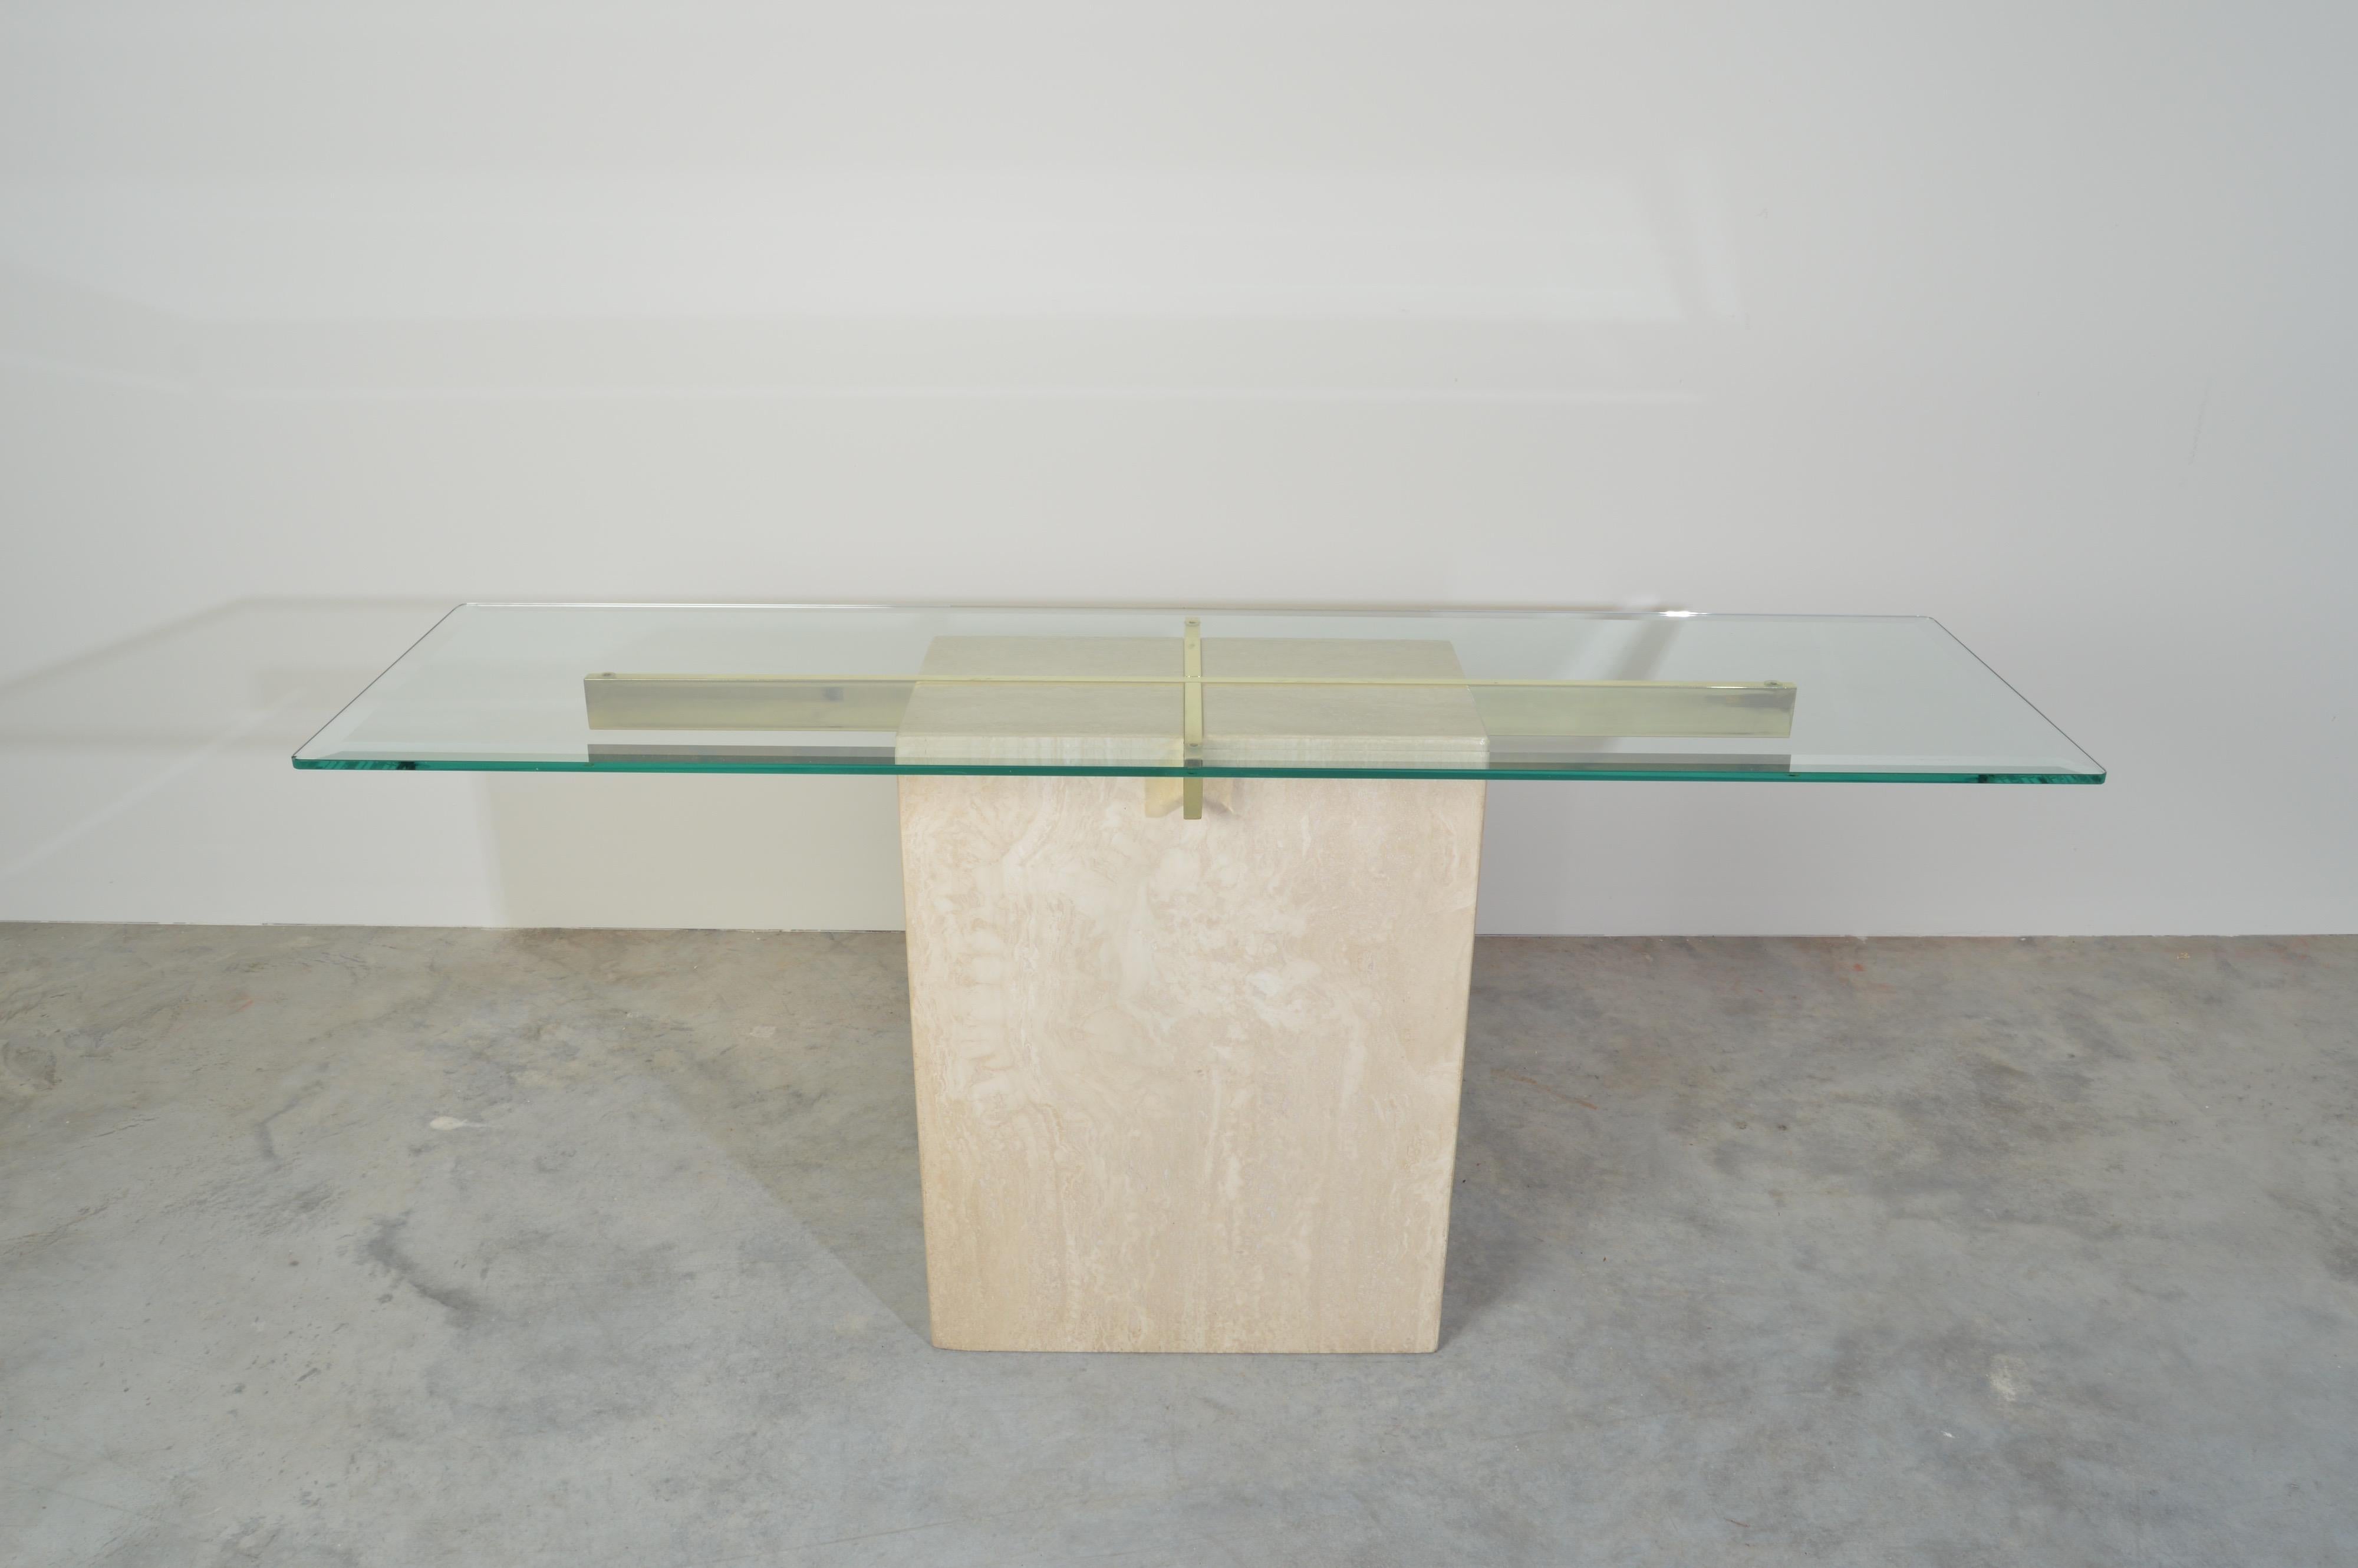 Console table by Artedi having travertine base with brass glass supports, circa 1980.
Very nice condition.